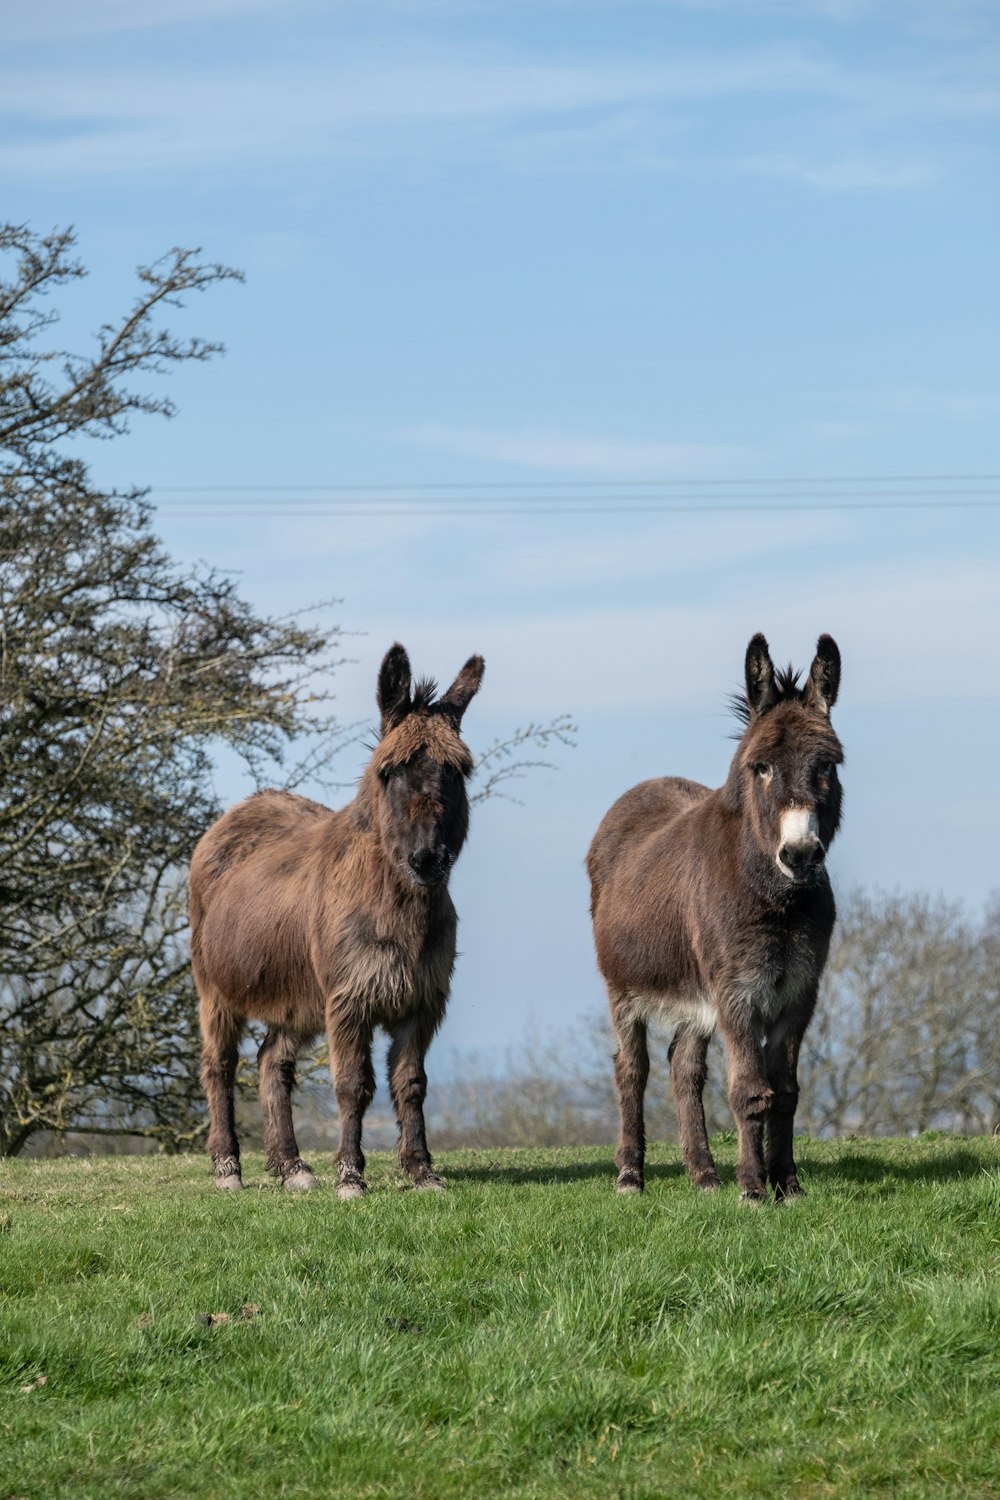 brown and black donkey on green grass field during daytime